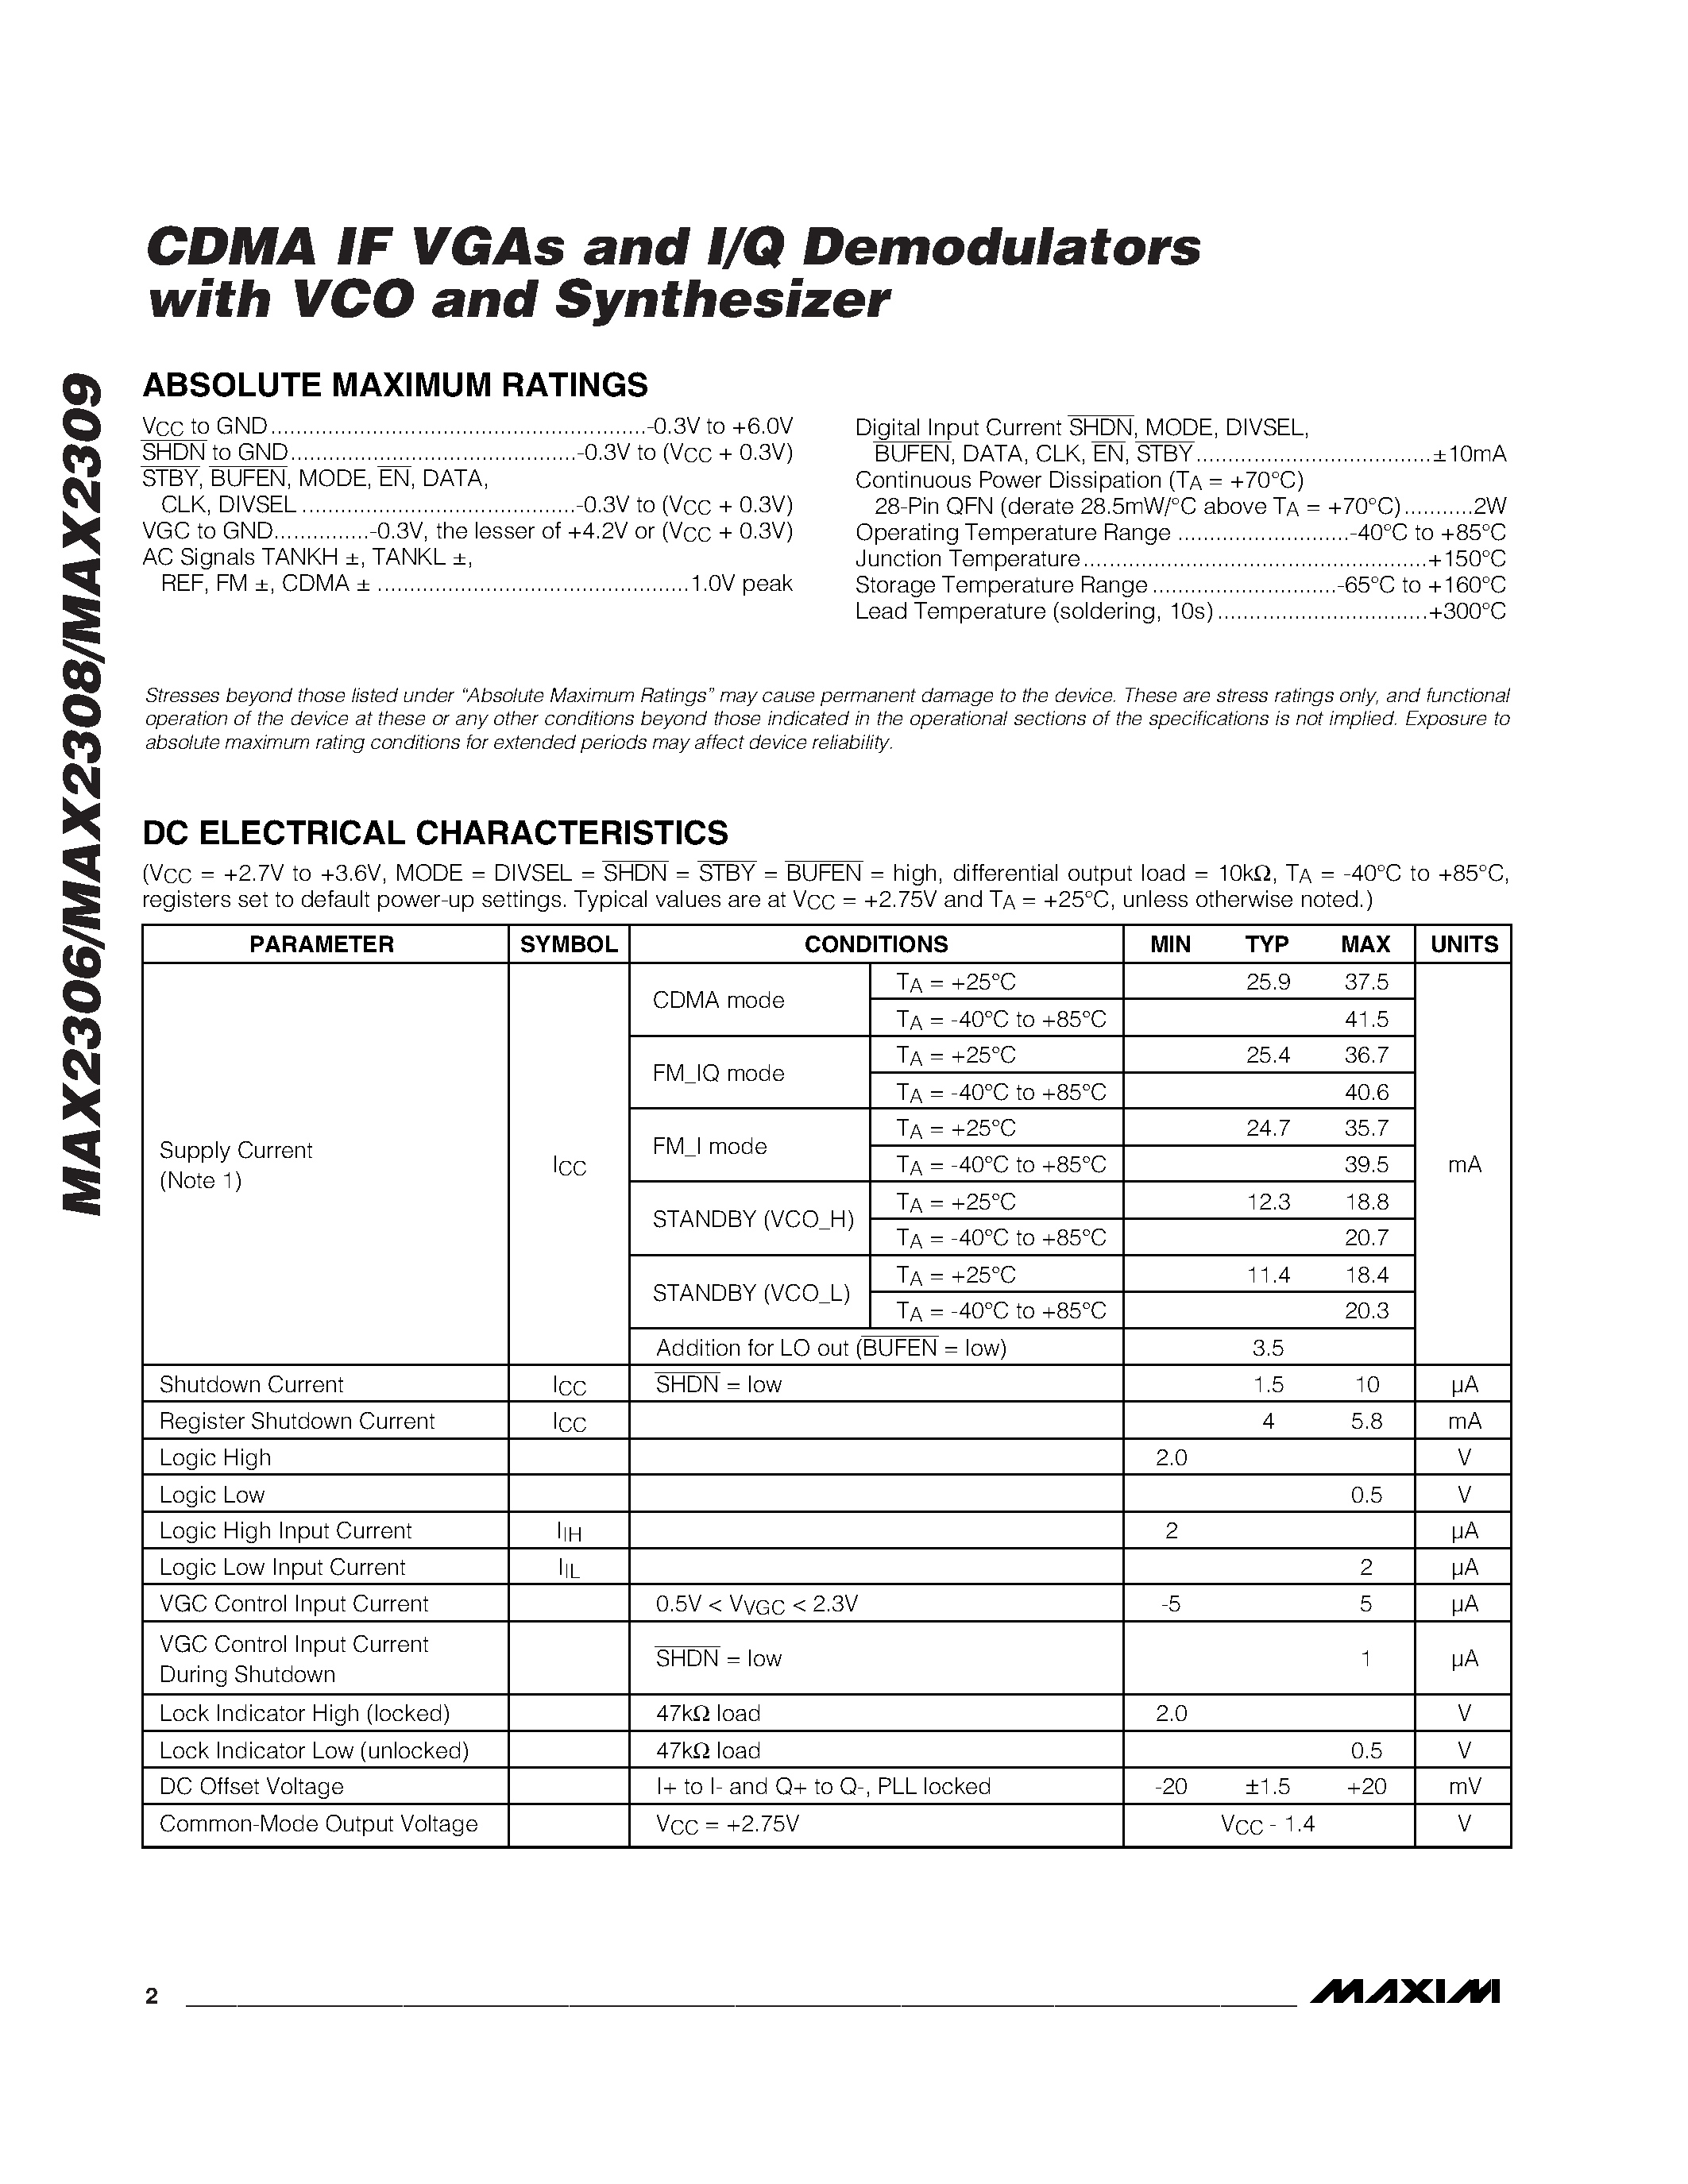 Datasheet MAX2309 - CDMA IF VGAs and I/Q Demodulators with VCO and Synthesizer page 2